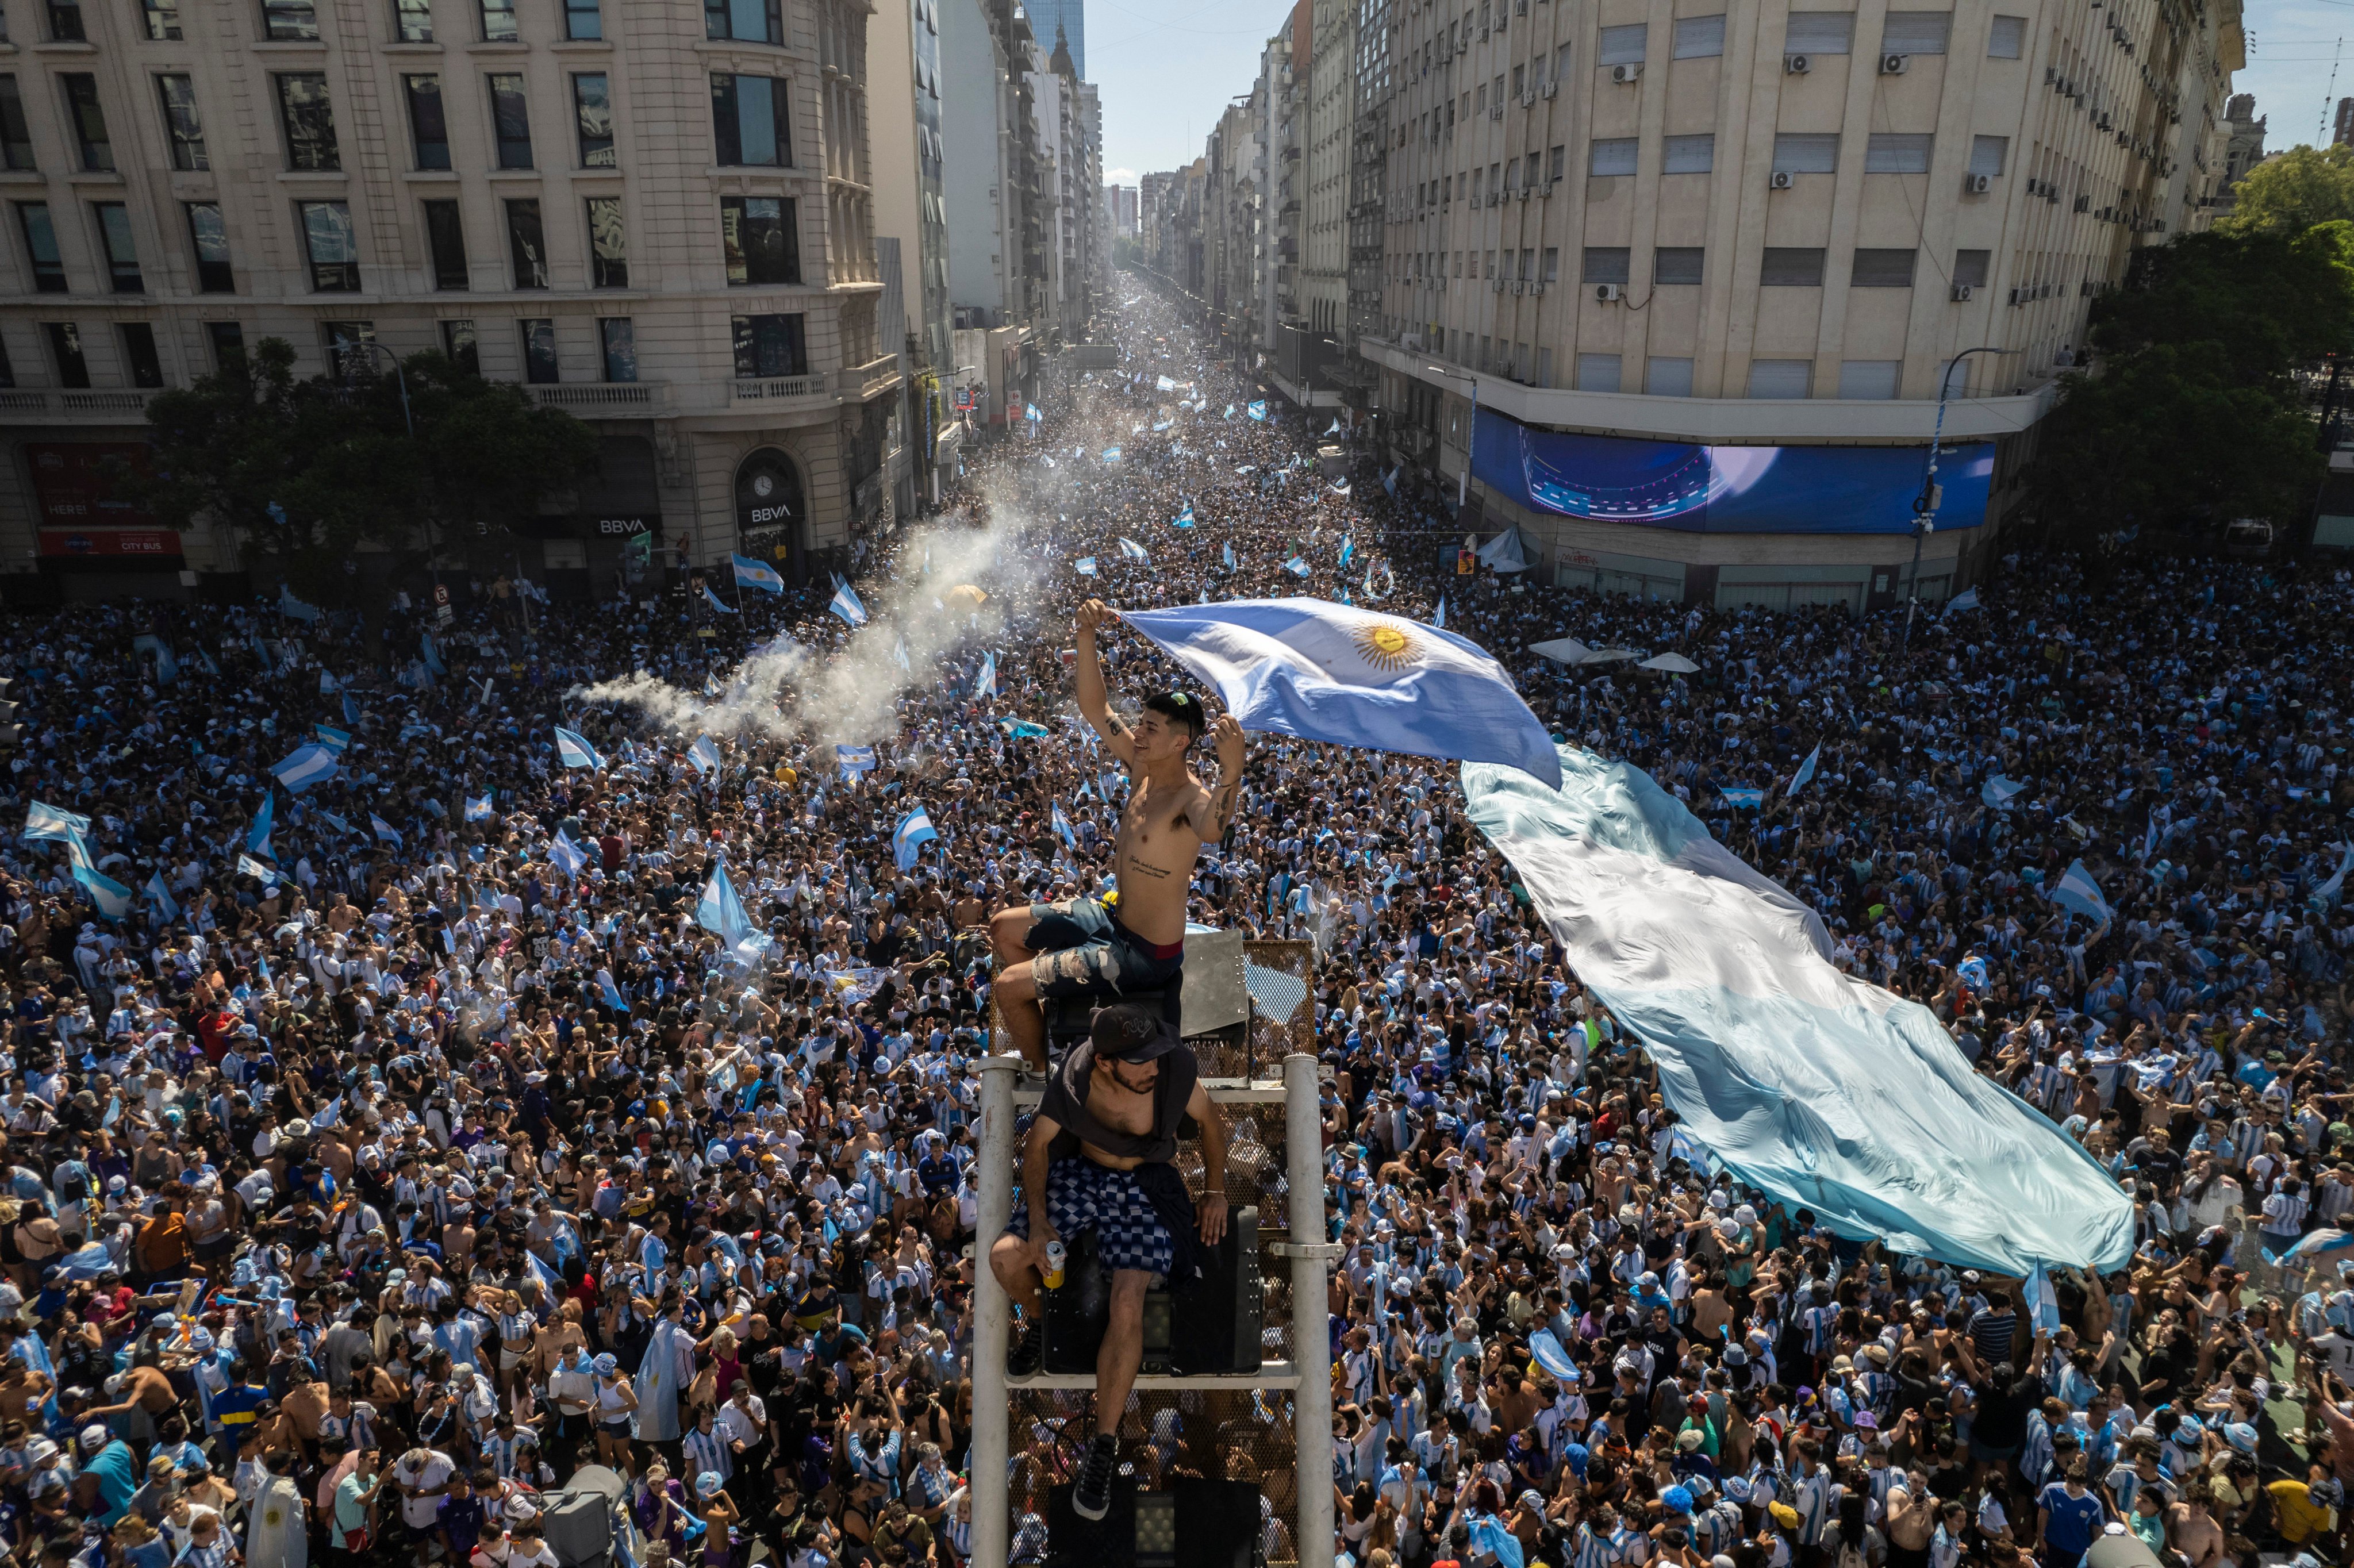 Argentine football fans descend on the capital’s Obelisk to celebrate their team’s World Cup victory over France, in Buenos Aires, Argentina on Sunday. Photo: AP